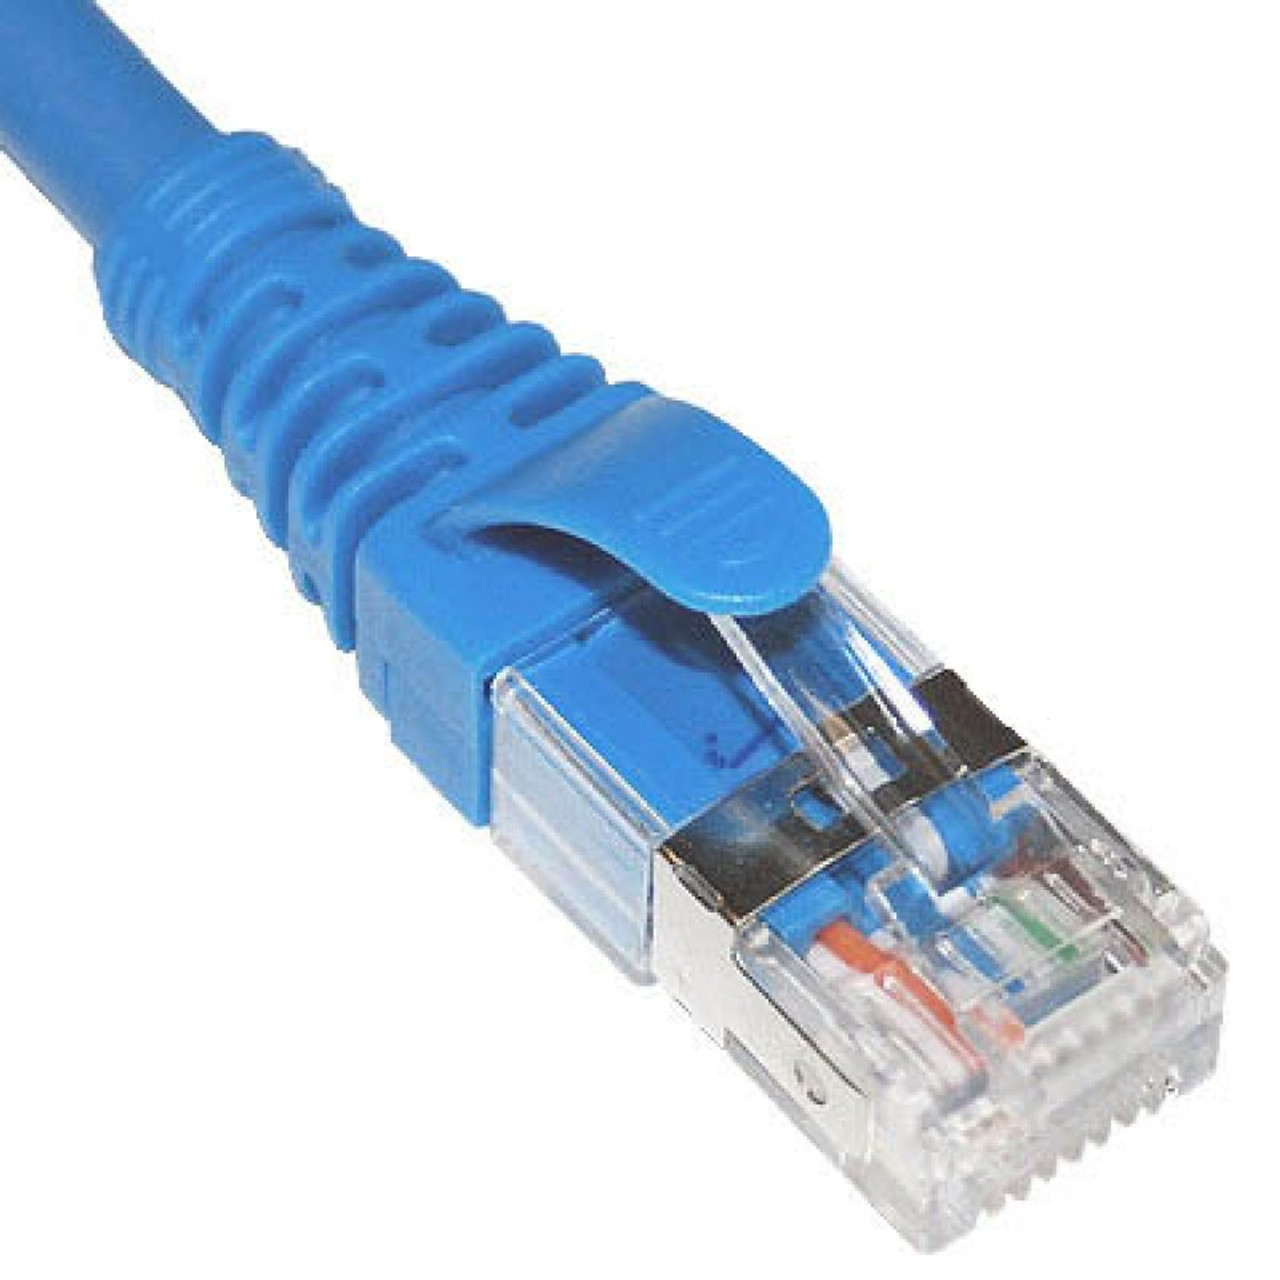 23Awg 120 Ft Shielded Cat6a STP 10G High Performance Snagless STP Ethernet Patch Cable 50u Gold Plating - UL CSA CMR and 100% Copper Blue Made in USA